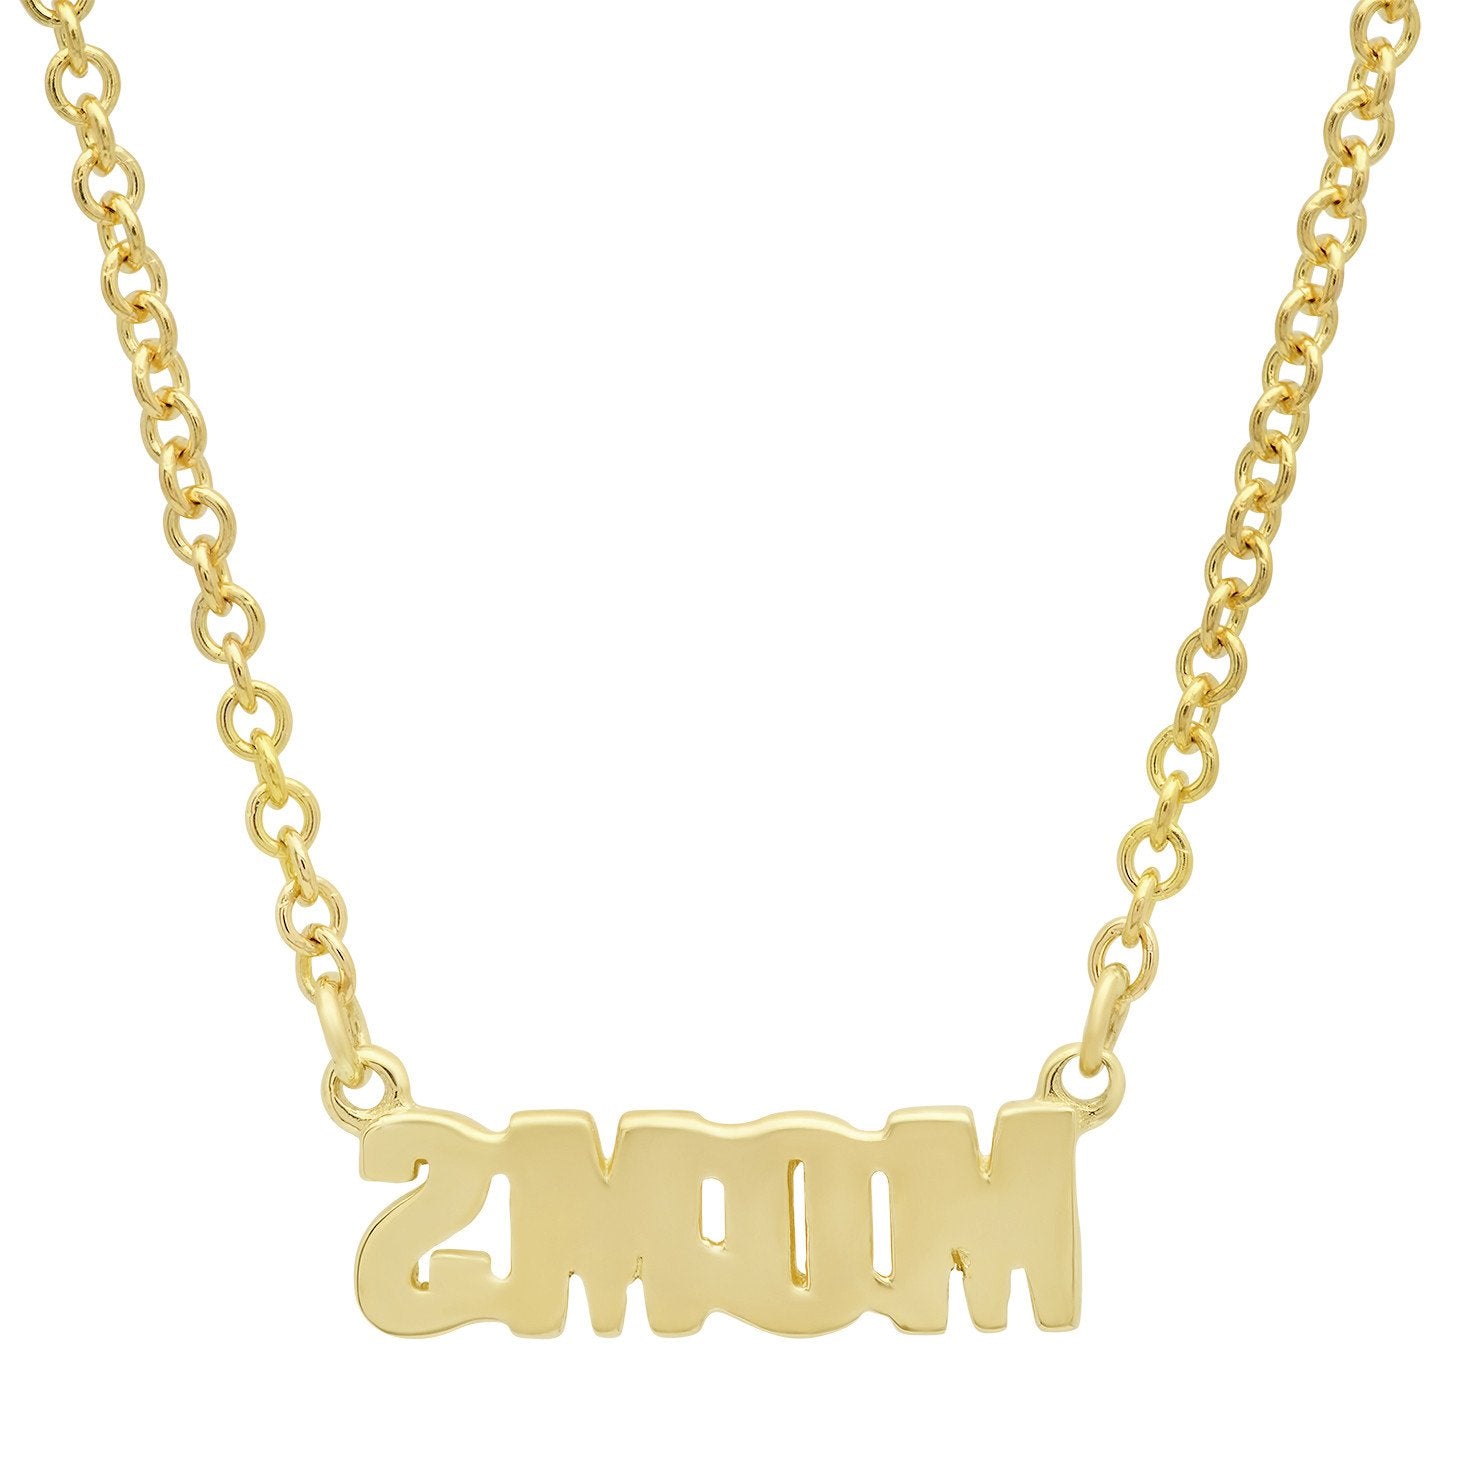 "Moms" Necklace